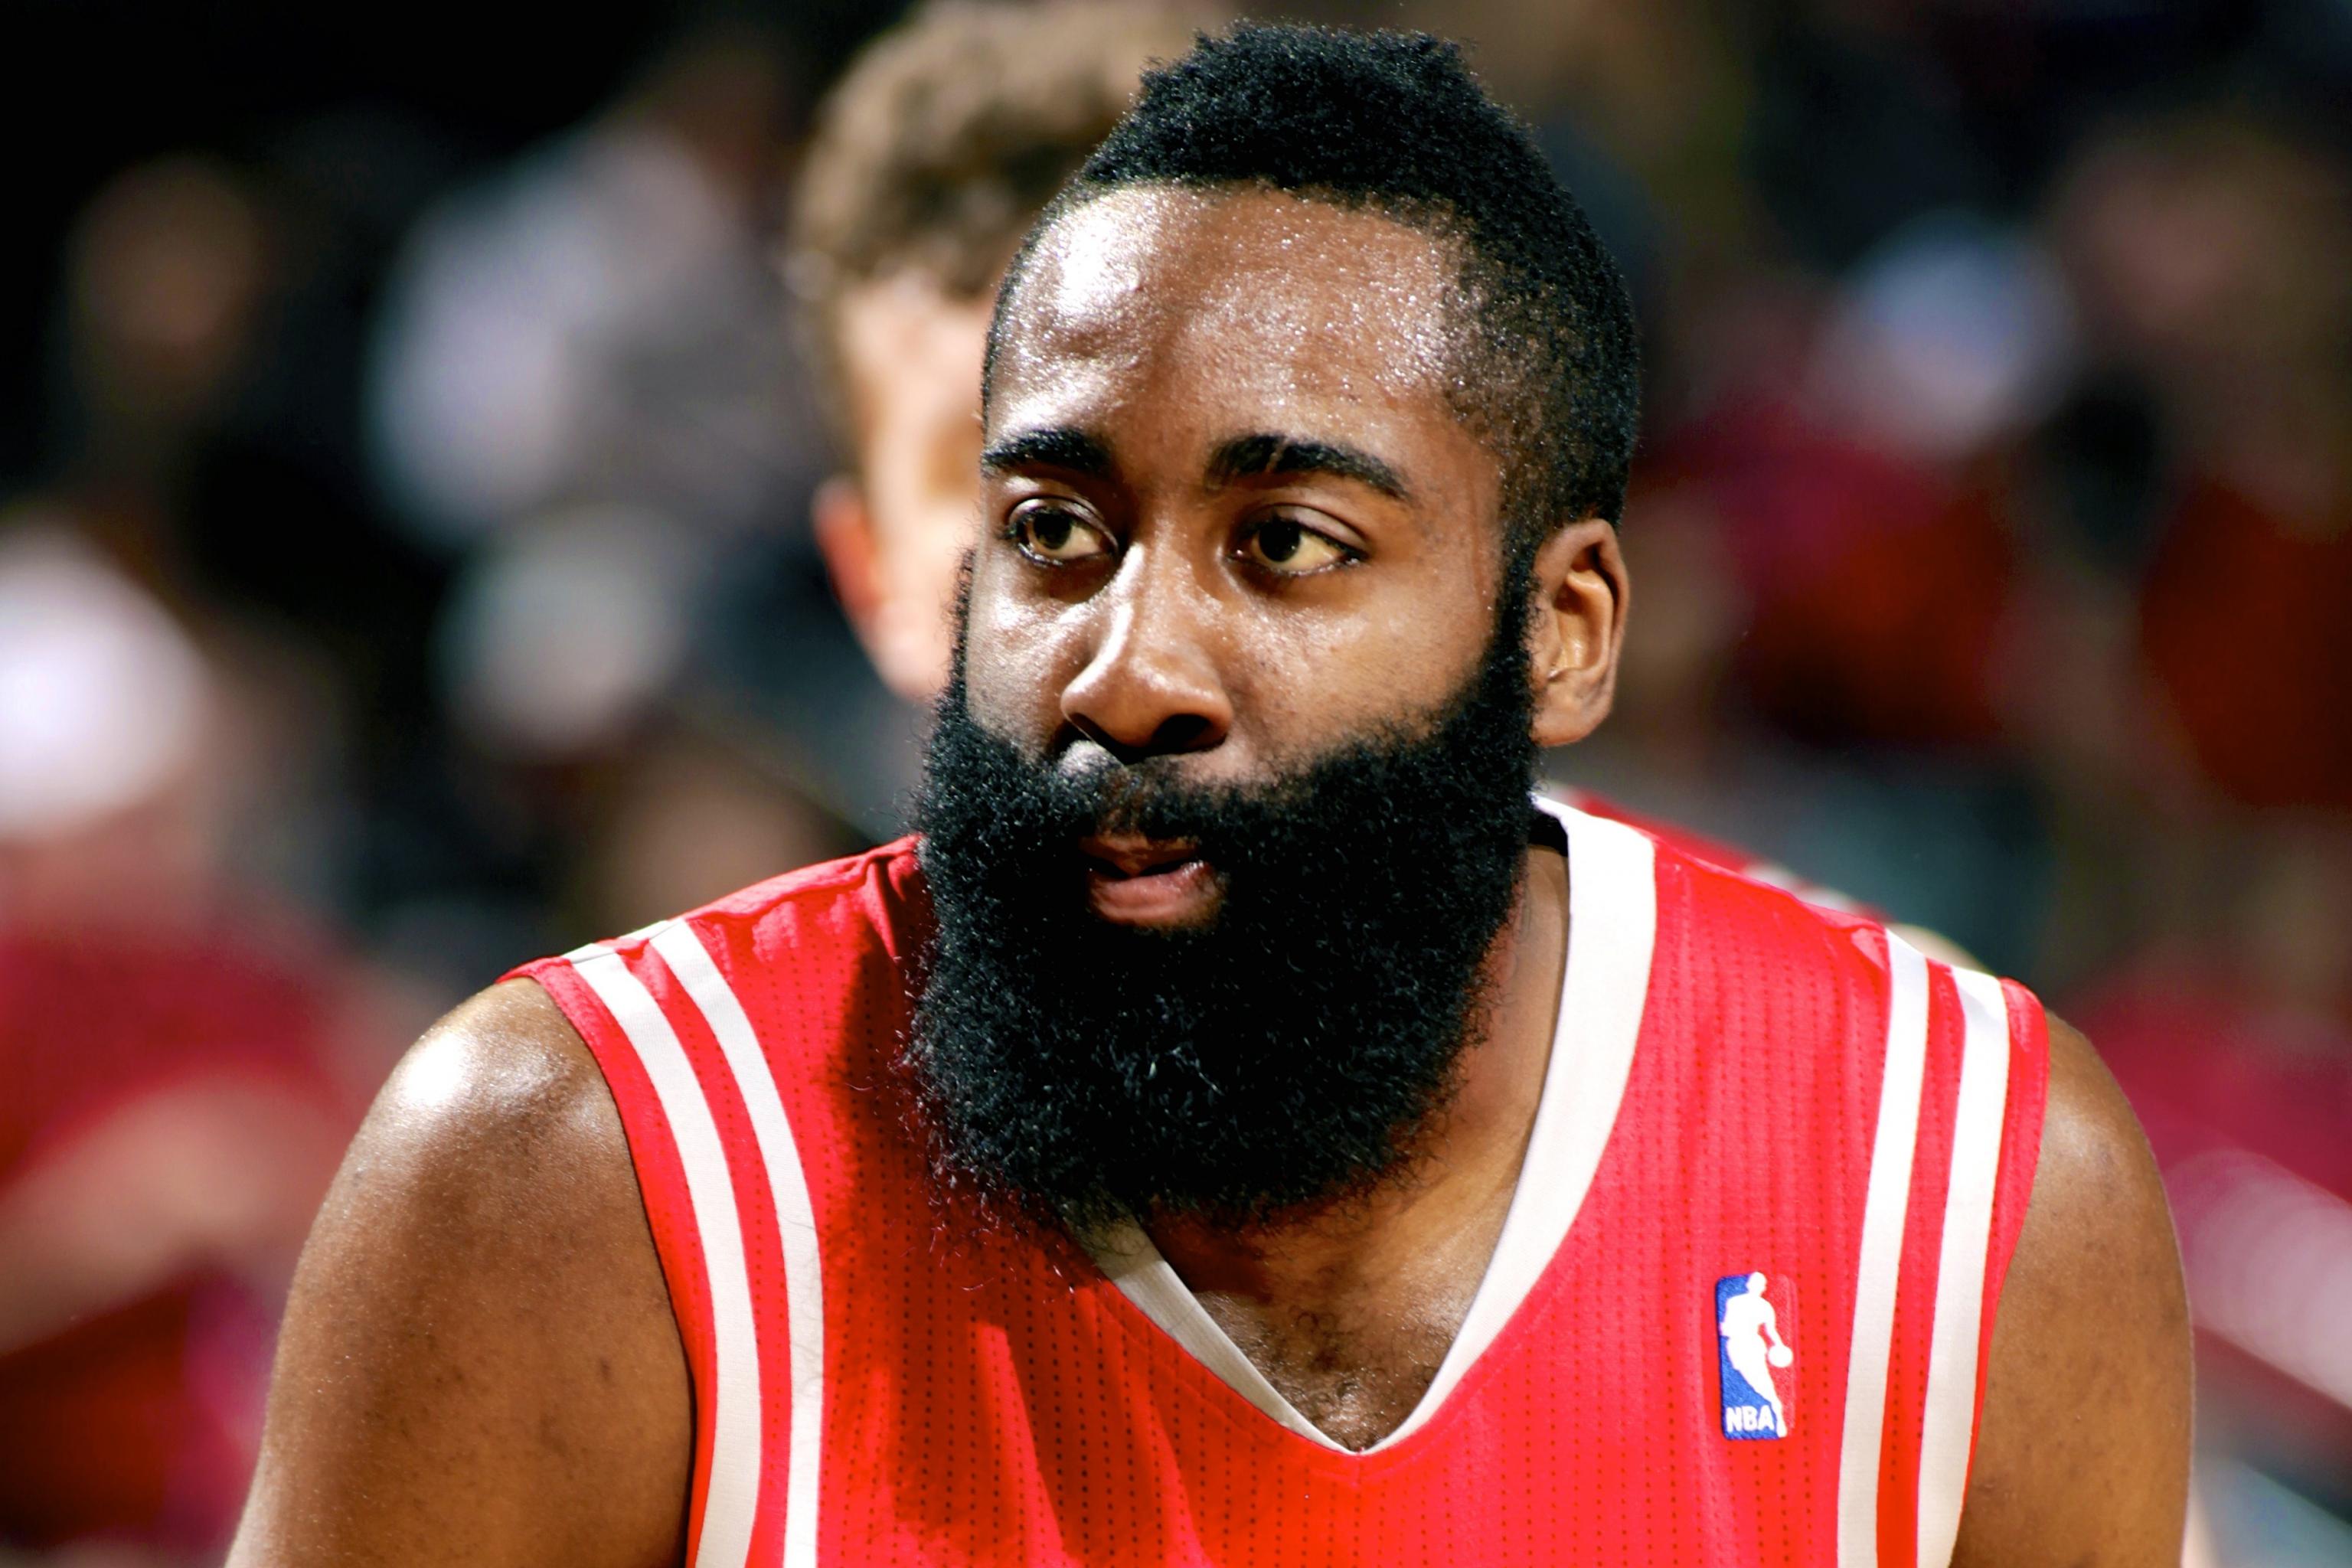 James Harden reflects on Russell Westbrook, Thunder days in ESPN interview